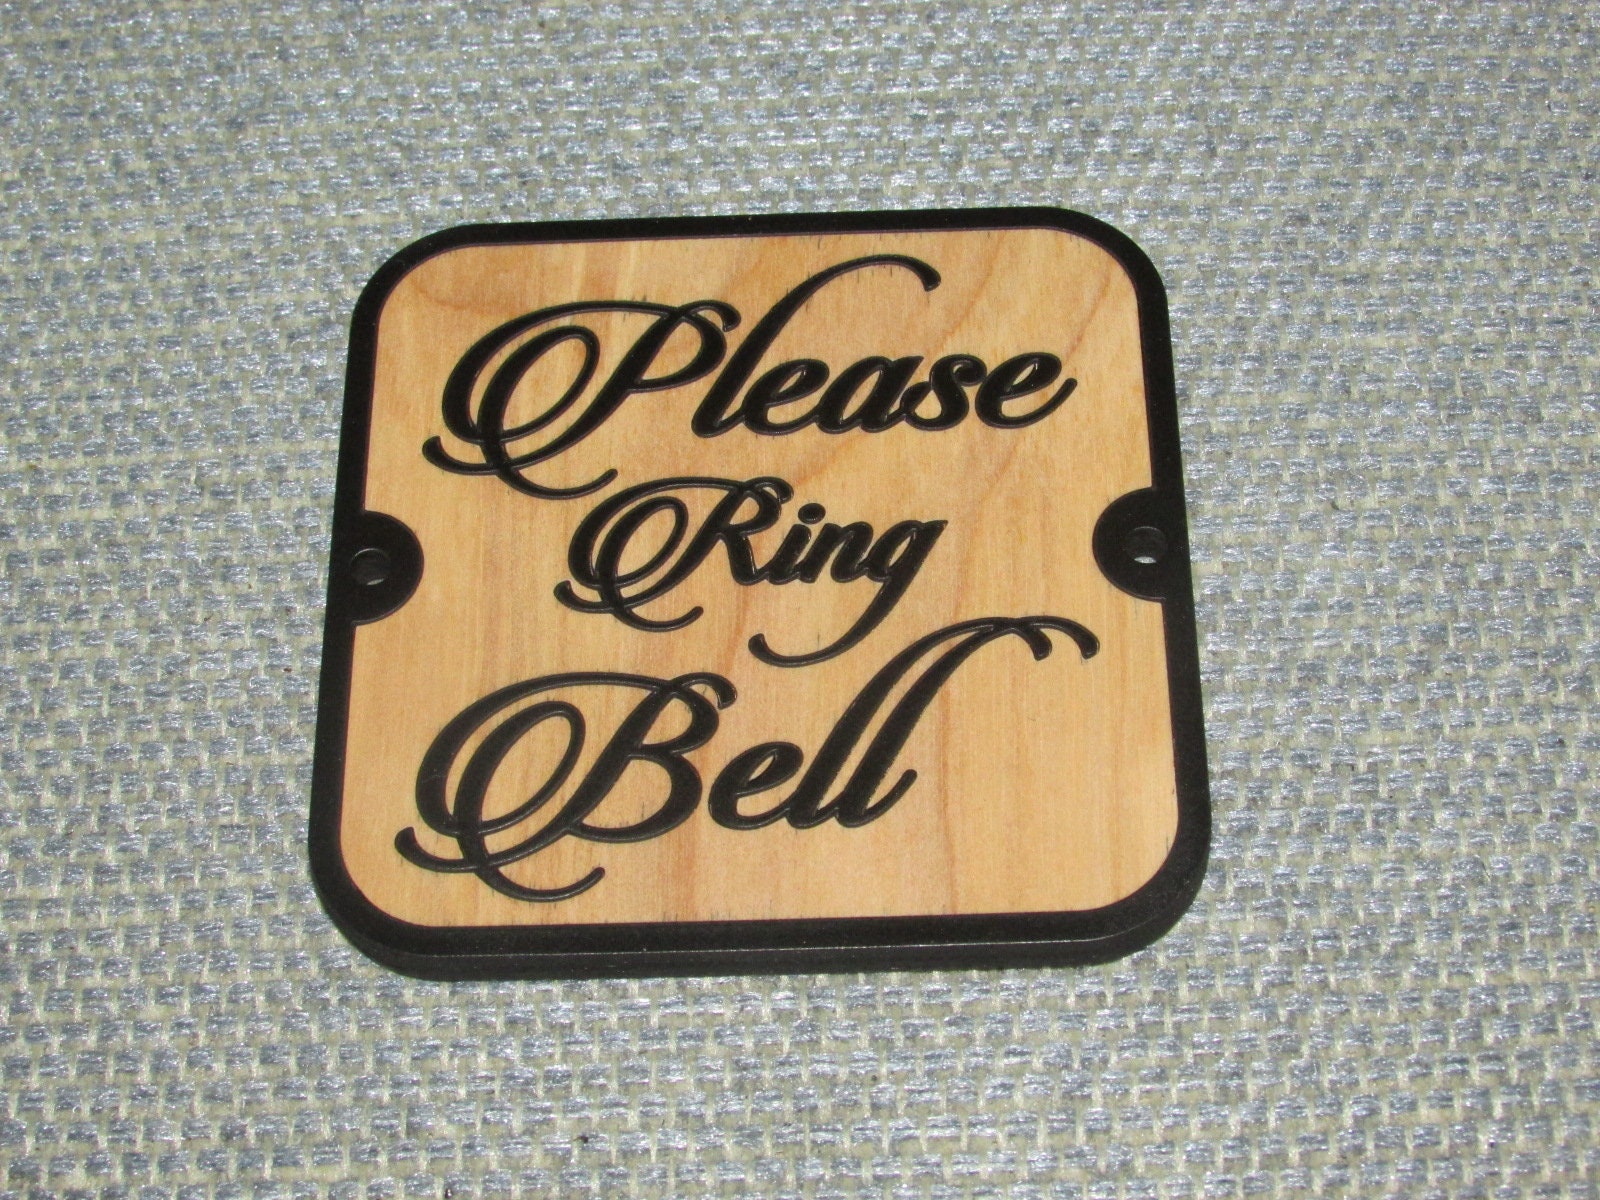 Standard Please Ring Bell for Assistance (Bell) Sign (Brushed Silver) -  Small - Walmart.com